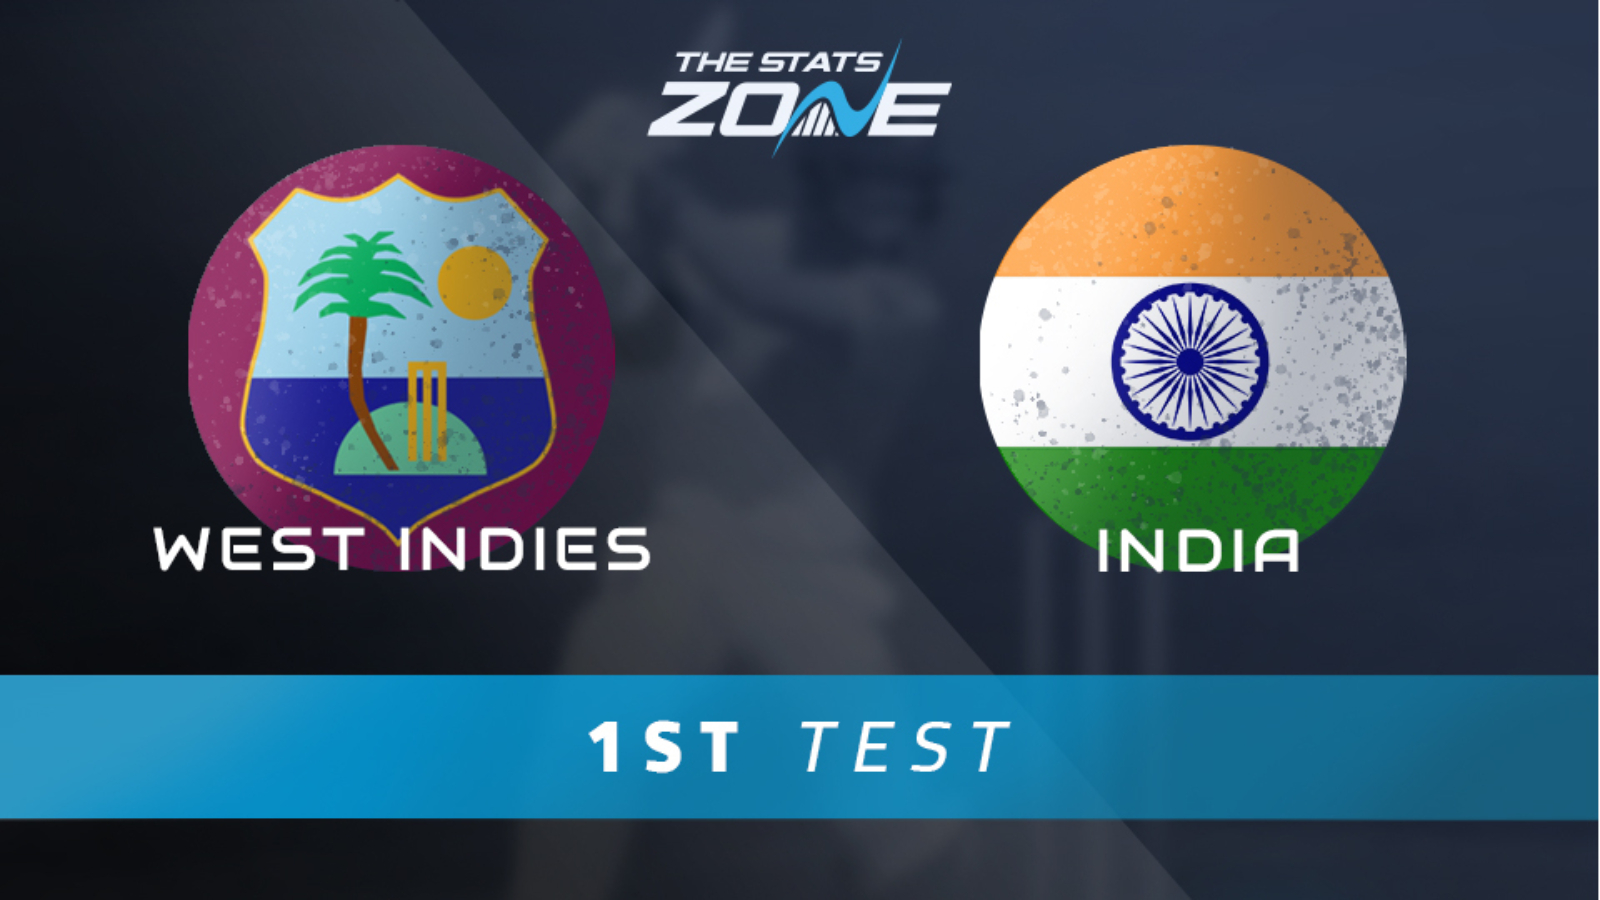 West Indies vs India 1st Test Match Preview & Prediction The Stats Zone